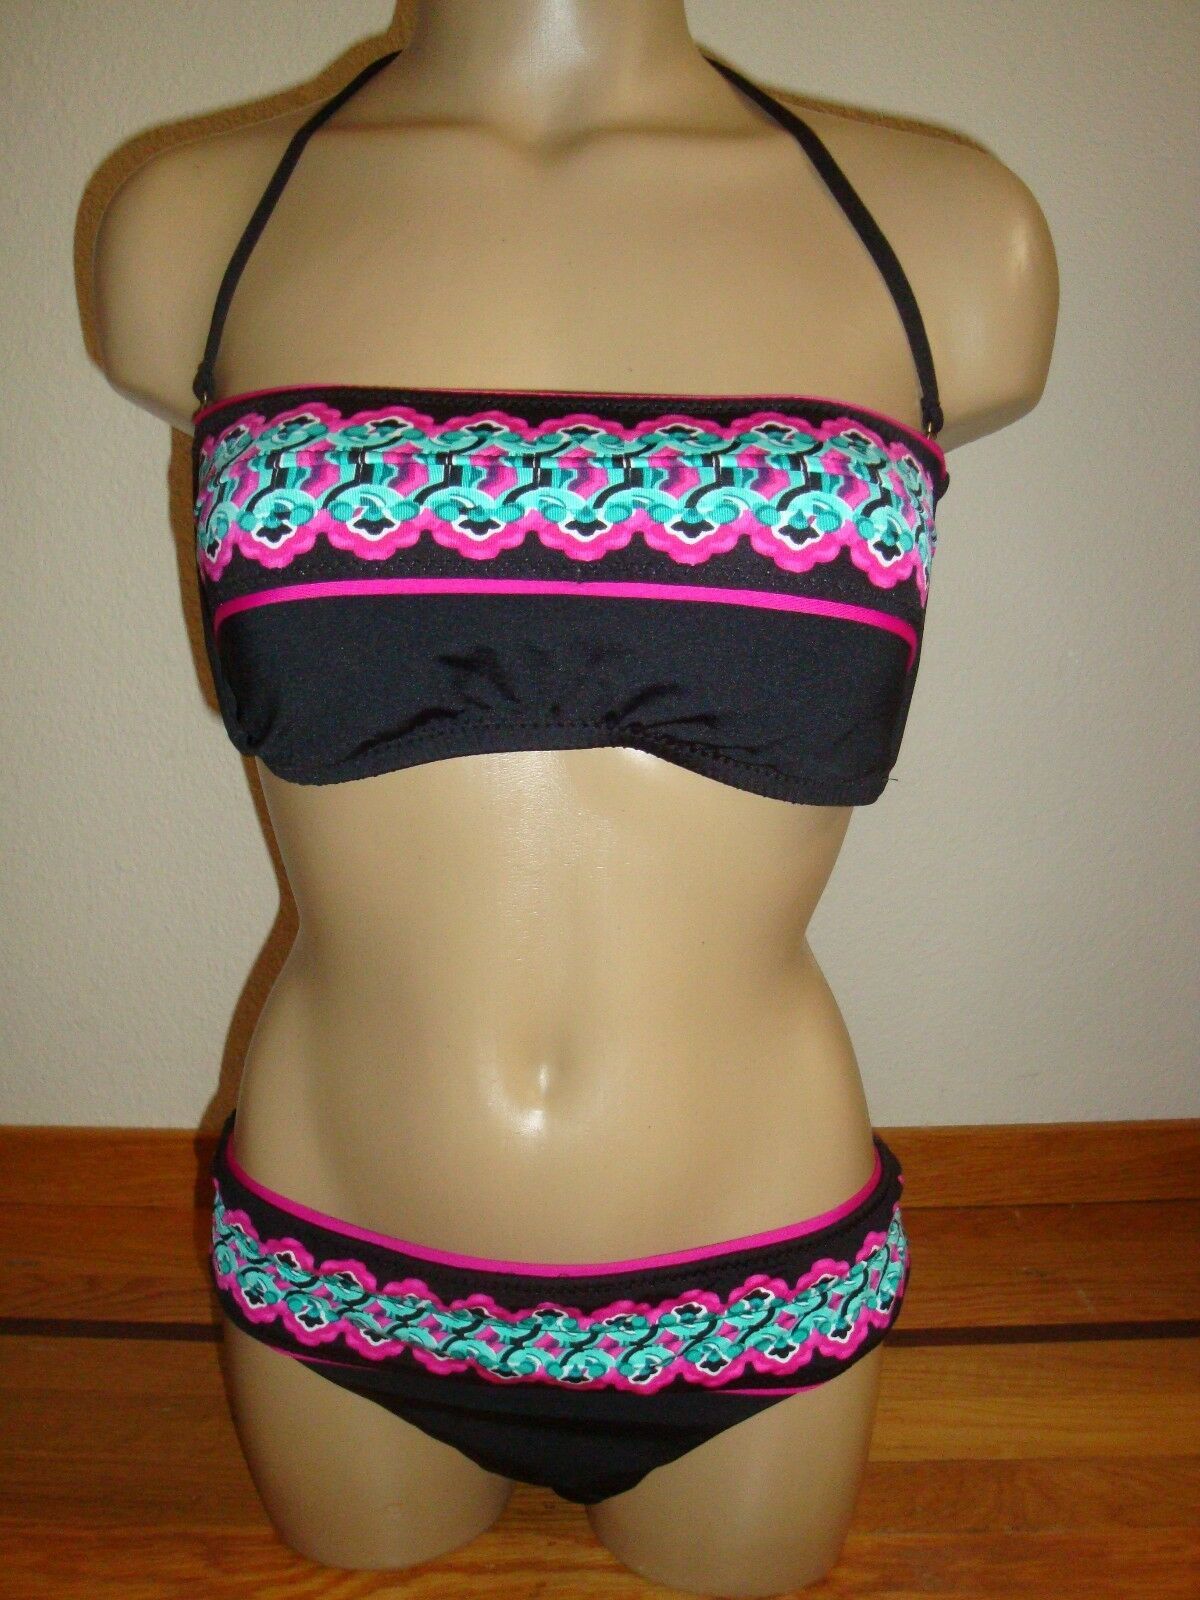 Primary image for NEW BECCA 2 PC SWIMSUIT BANDEAU TOP SIZE M/FOLDOVER BOTTOM SIZE L BLACK MULTI